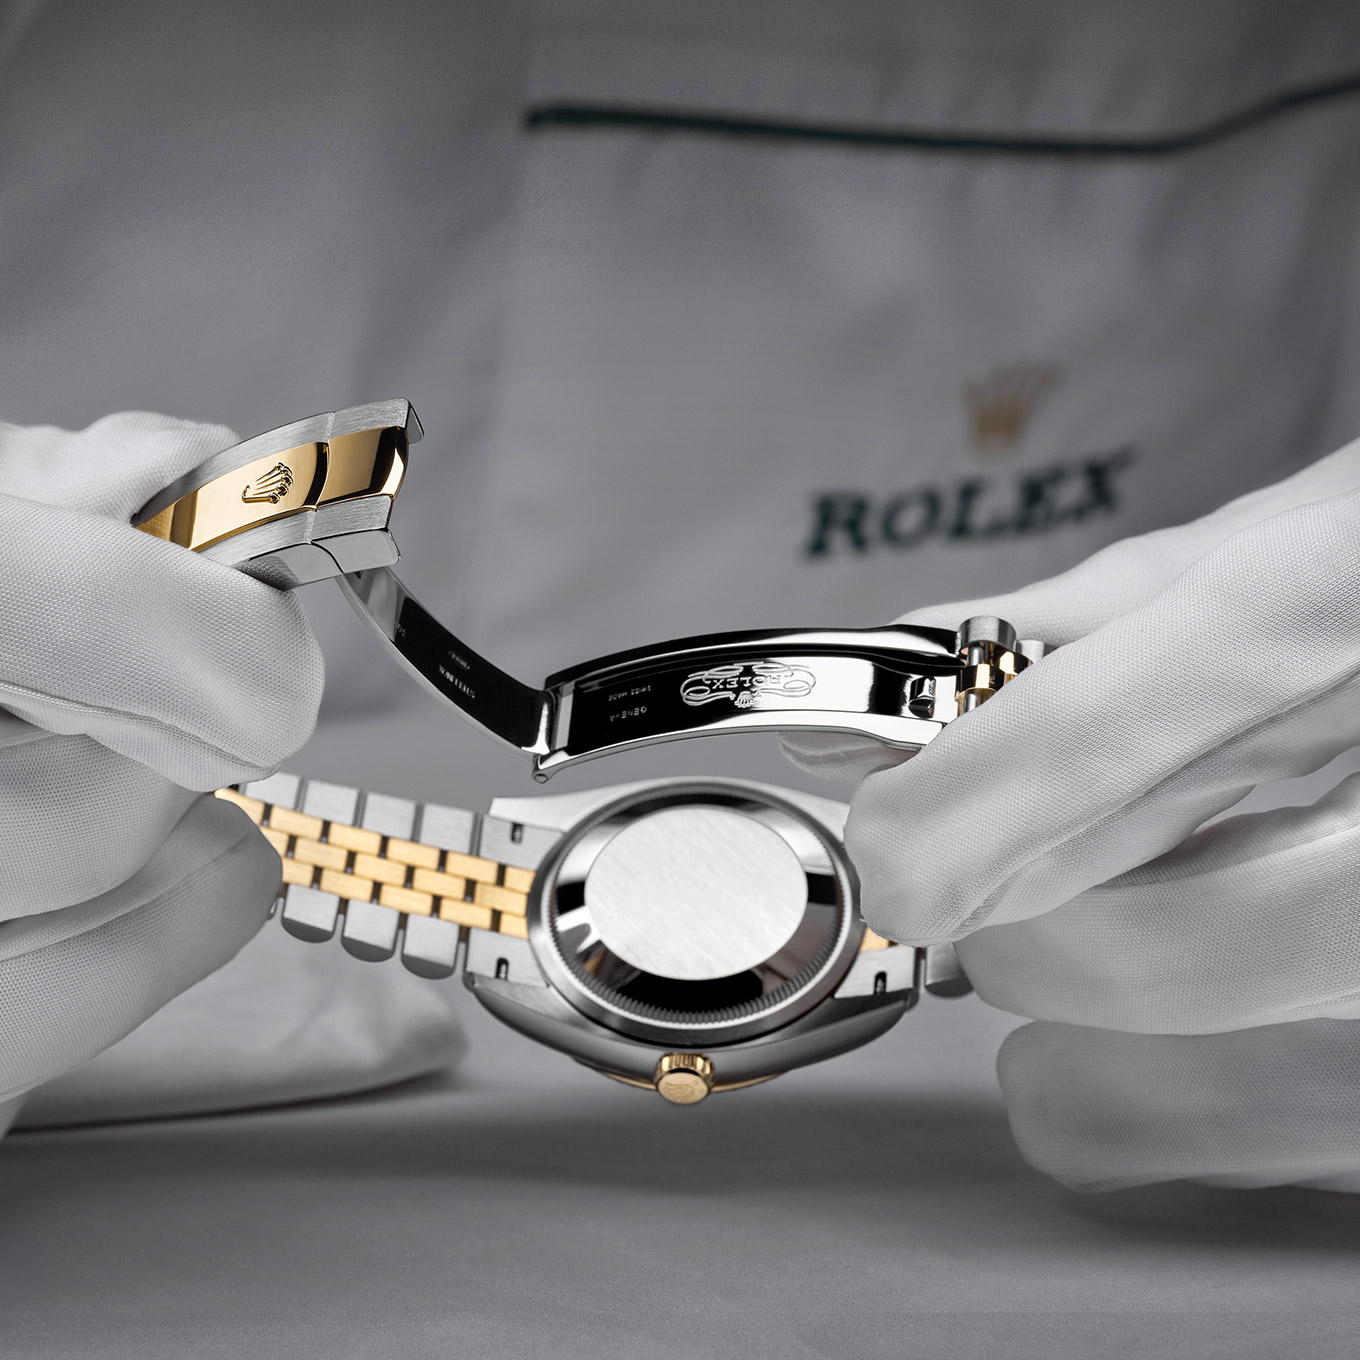  Rolex servicing at Hartgers Jewelers in Wyckoff, NJ